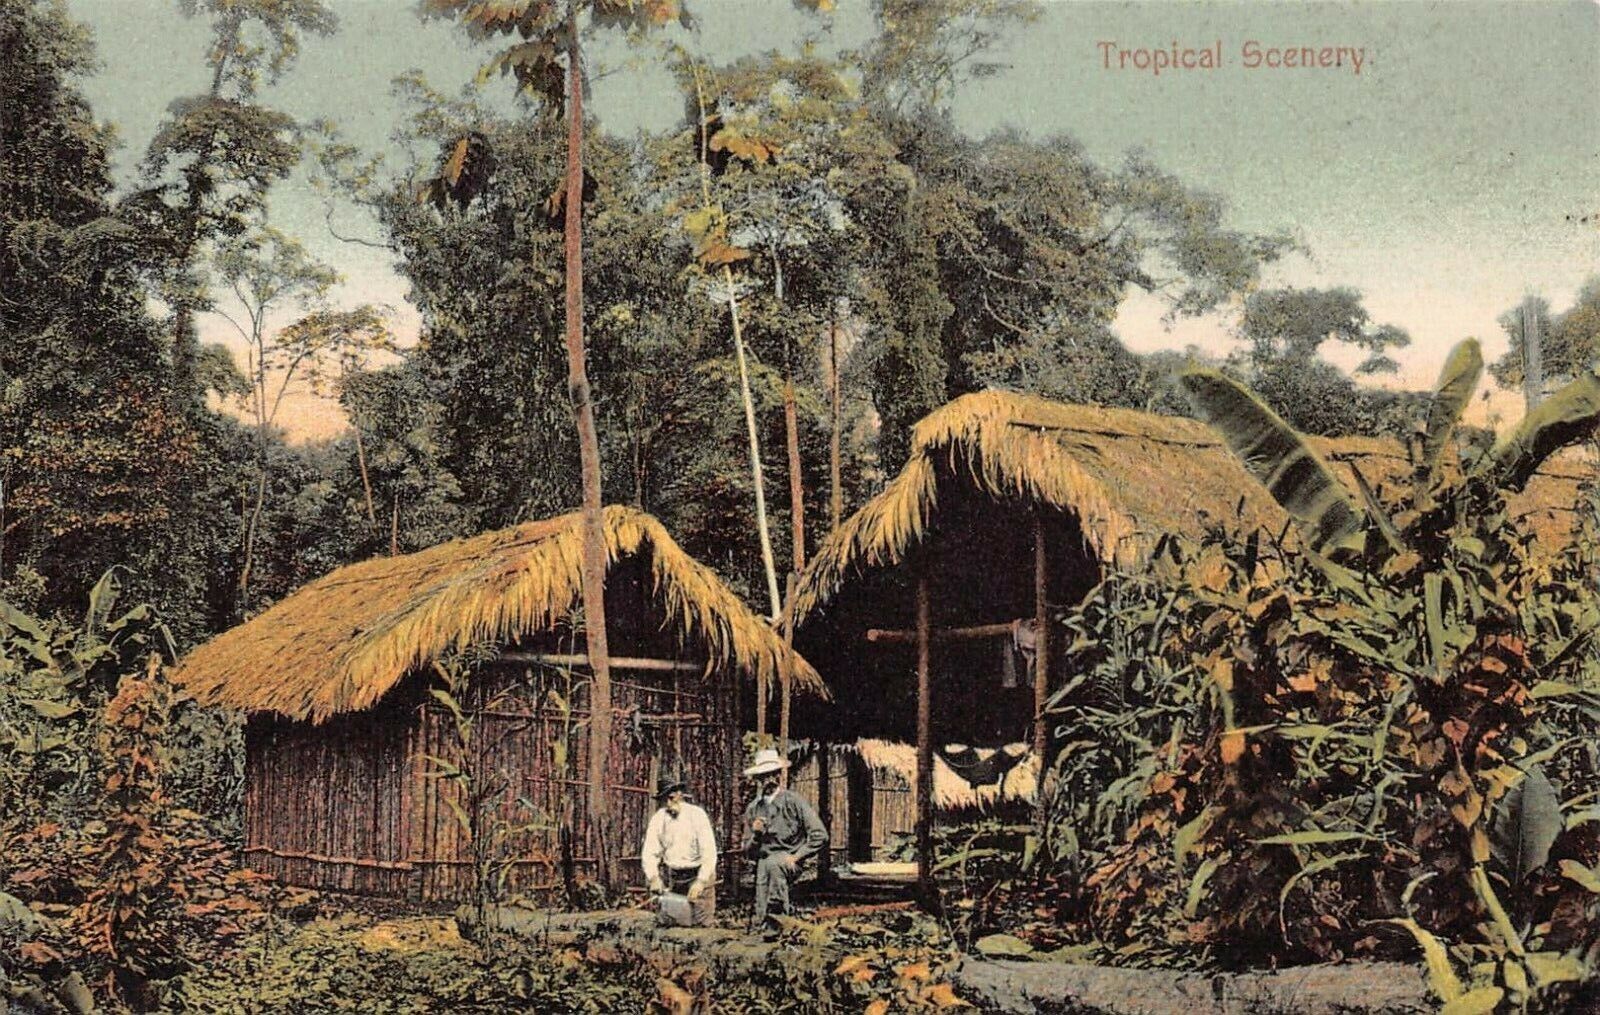 Native Houses and Tropical Scenery, Panama, Early Postcard, Unused 